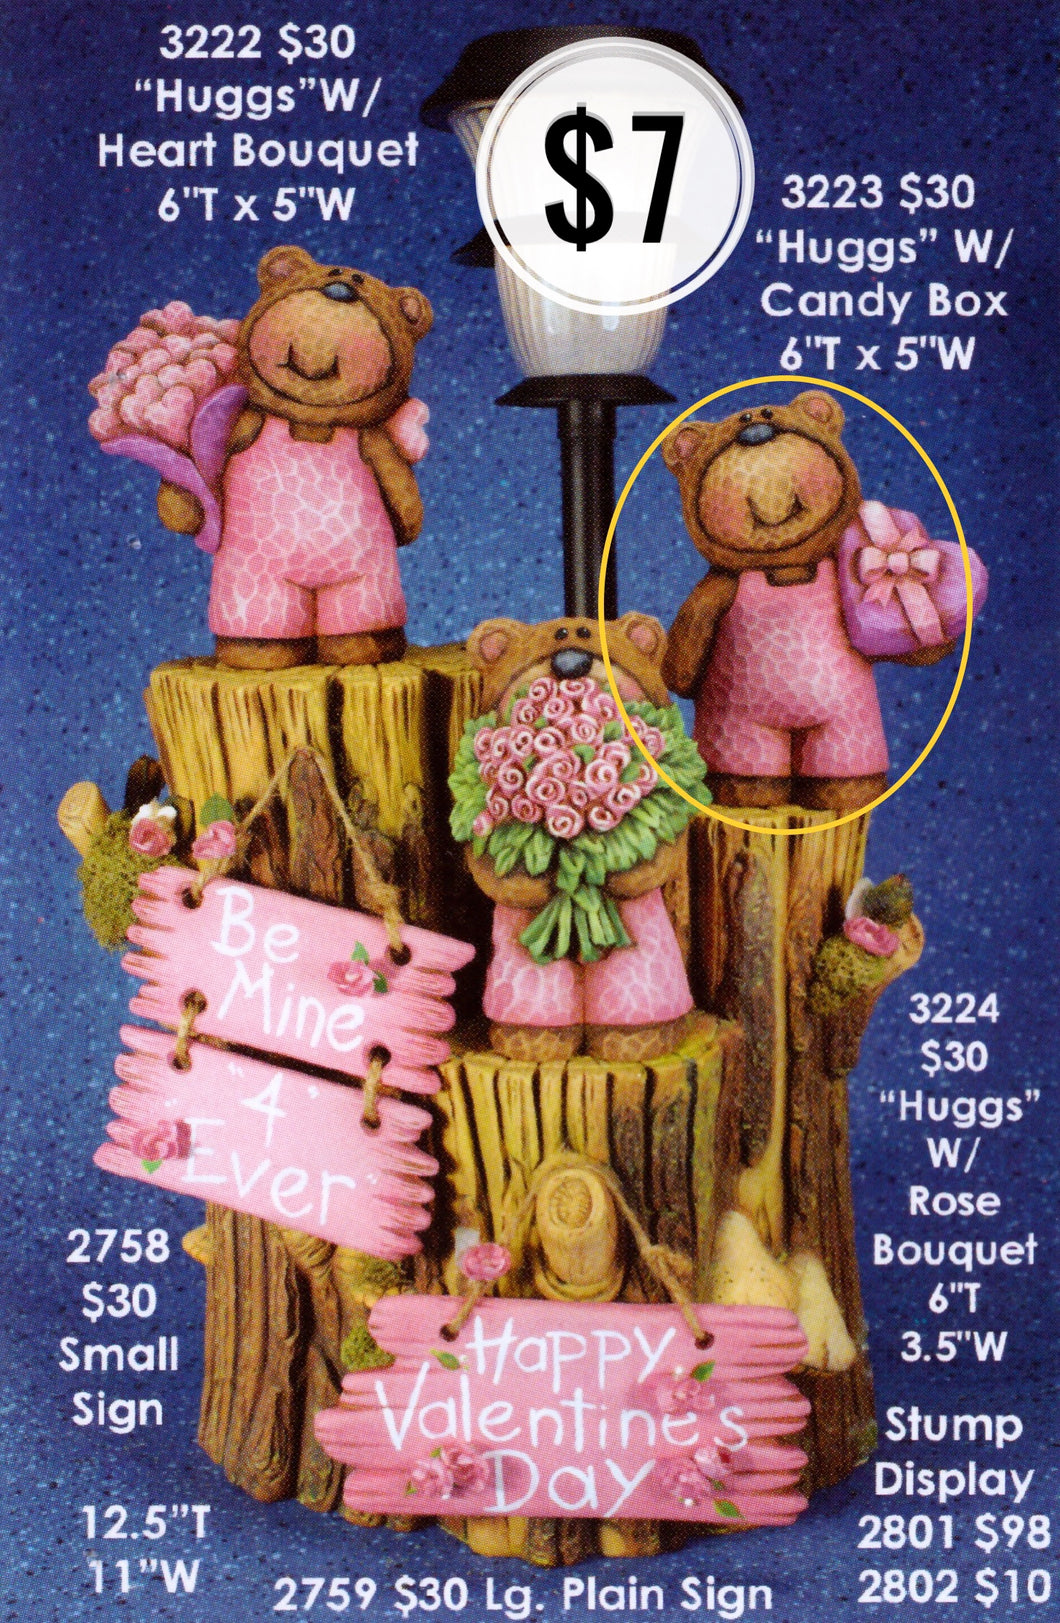 “Huggs” with Candy Box